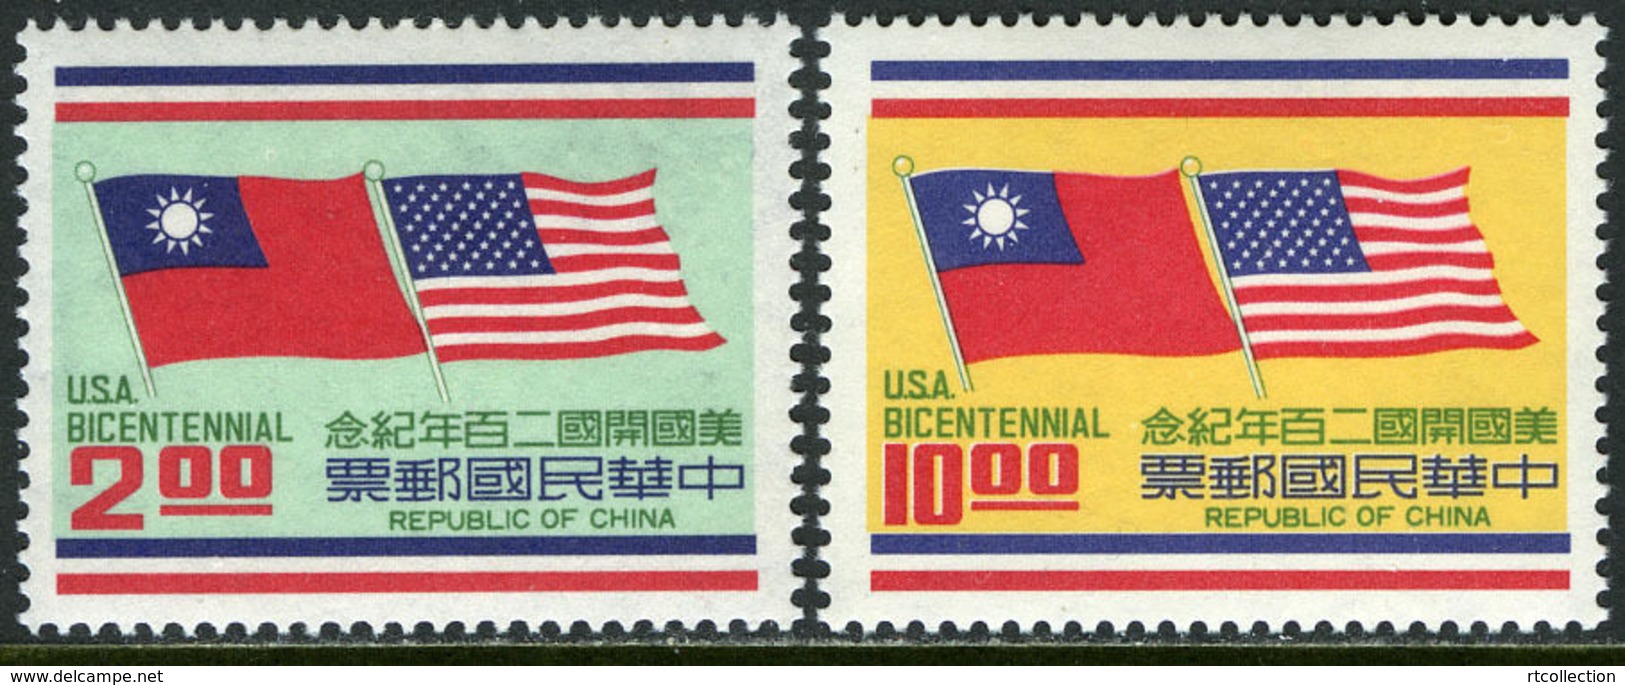 Taiwan 1976 200th Anniv American Revolution China US USA Bicentennial Flags History Celebrations Stamps MNH SC 1995-1996 - Stamps